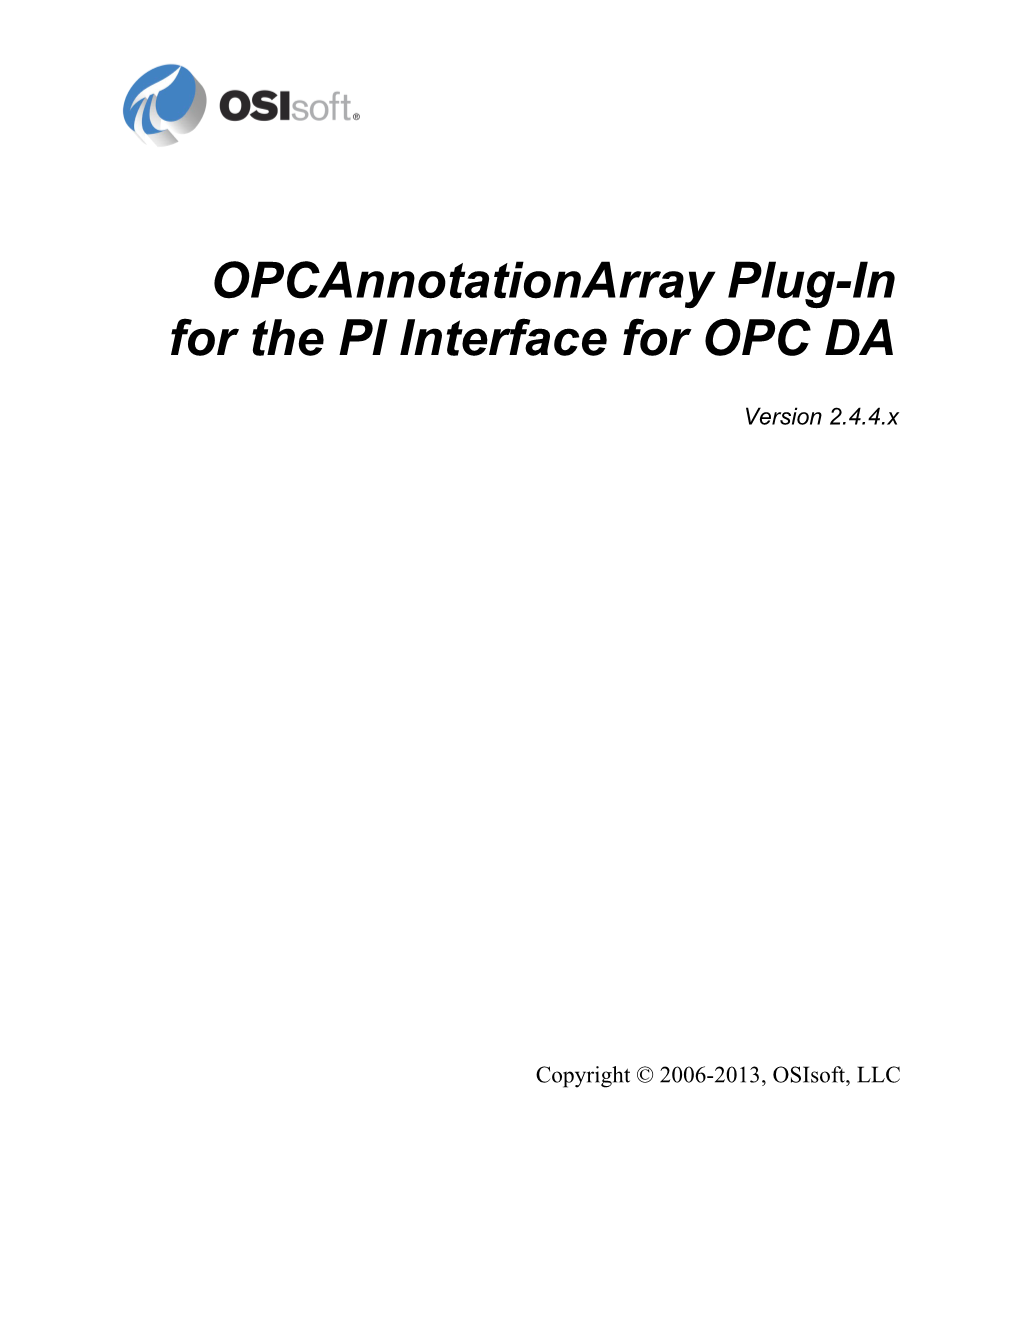 Opcannotation Array Plug-In DLL for OPC DA Interface to the PI System